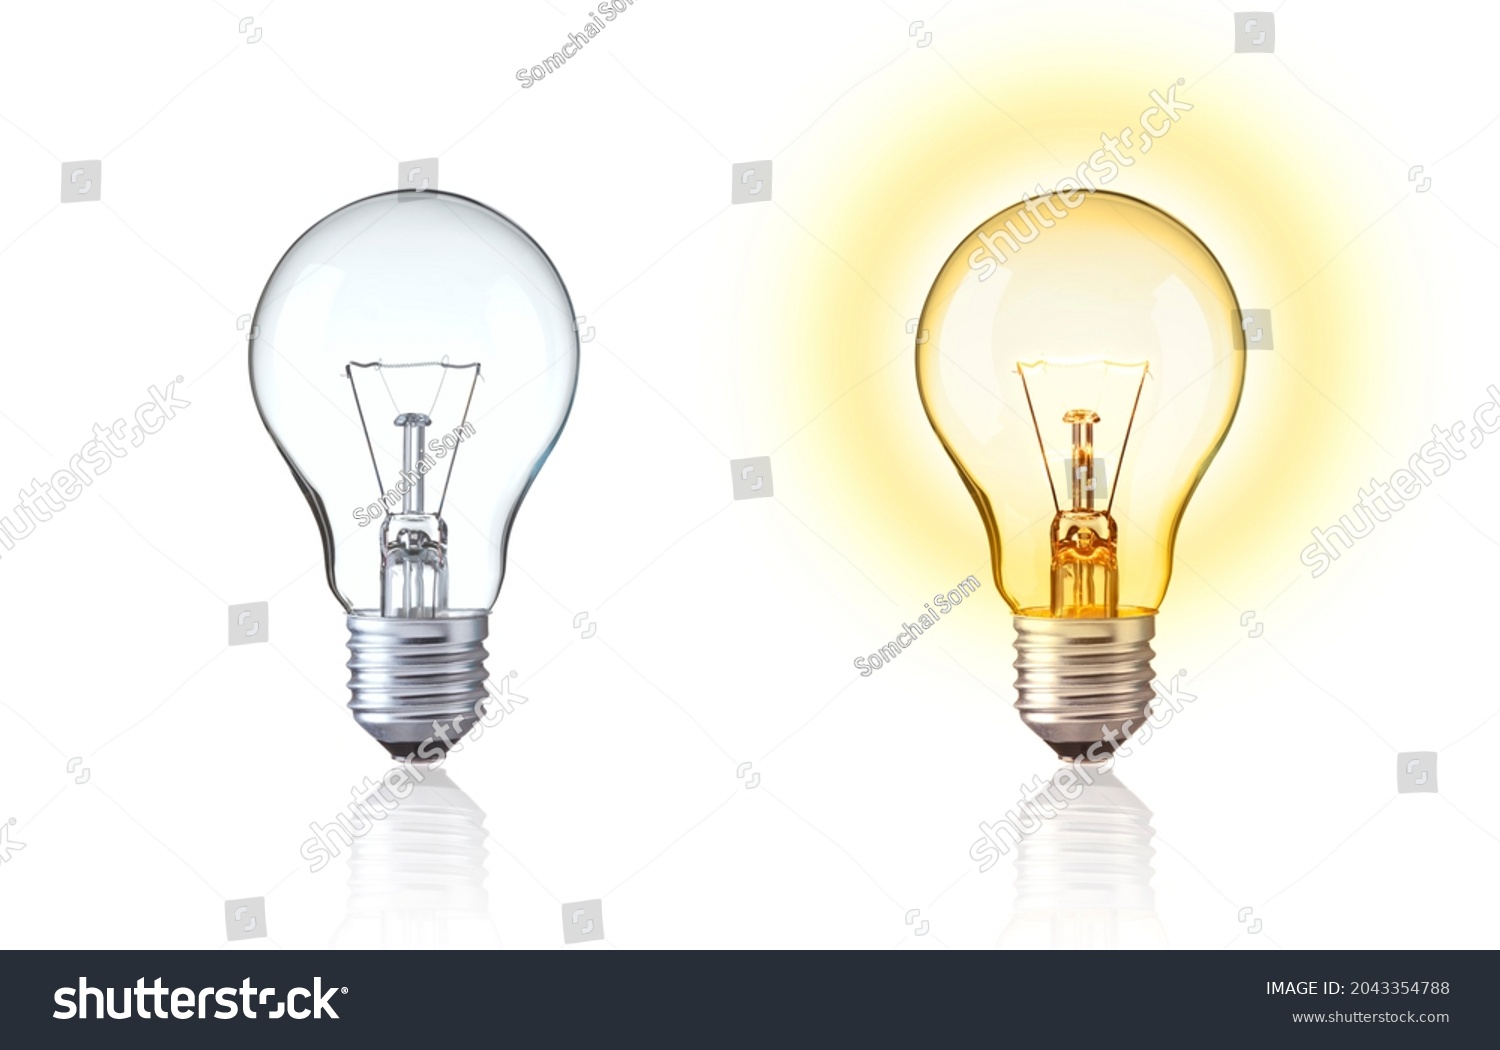 Classic light bulb isolate on white background. Turn on and turn off of Tungsten light bulb show big idea,  innovation, save energy, idea of Evolution, old style or retro light bulb Concept. #2043354788